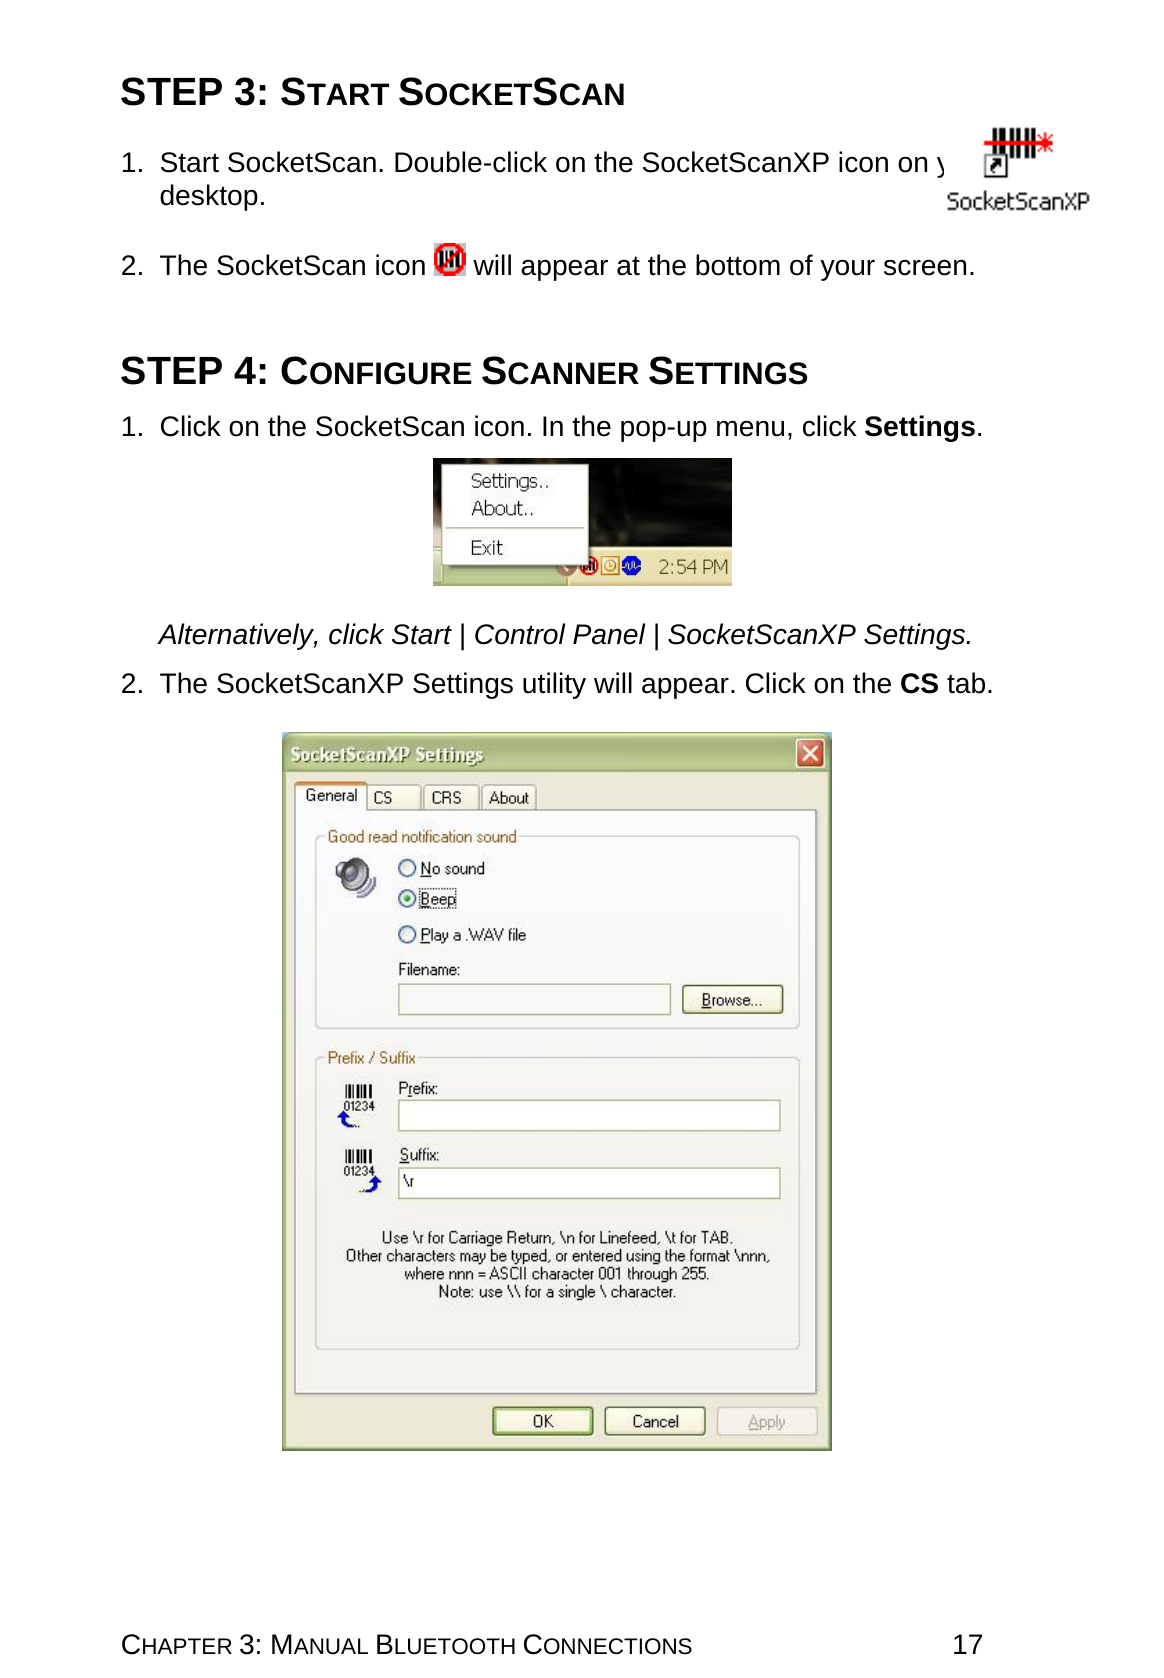 CHAPTER 3: MANUAL BLUETOOTH CONNECTIONS 17 STEP 3: START SOCKETSCAN  1. Start SocketScan. Double-click on the SocketScanXP icon on your desktop.  2. The SocketScan icon   will appear at the bottom of your screen.   STEP 4: CONFIGURE SCANNER SETTINGS  1.  Click on the SocketScan icon. In the pop-up menu, click Settings.    Alternatively, click Start | Control Panel | SocketScanXP Settings.  2. The SocketScanXP Settings utility will appear. Click on the CS tab.     